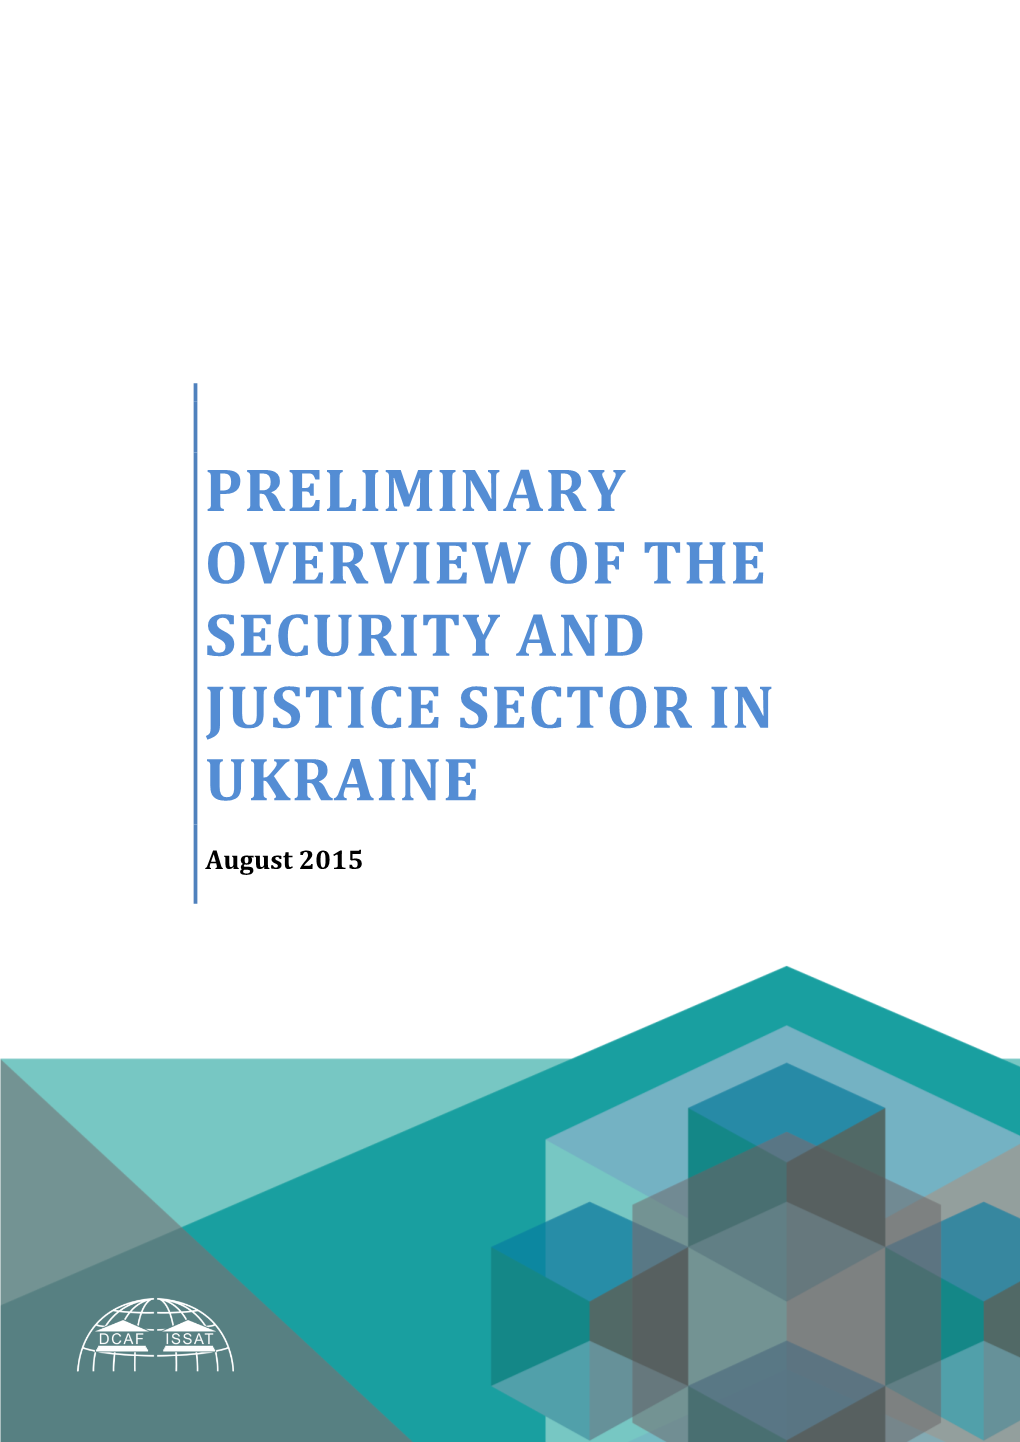 Preliminary Overview of the Security and Justice Sector in Ukraine